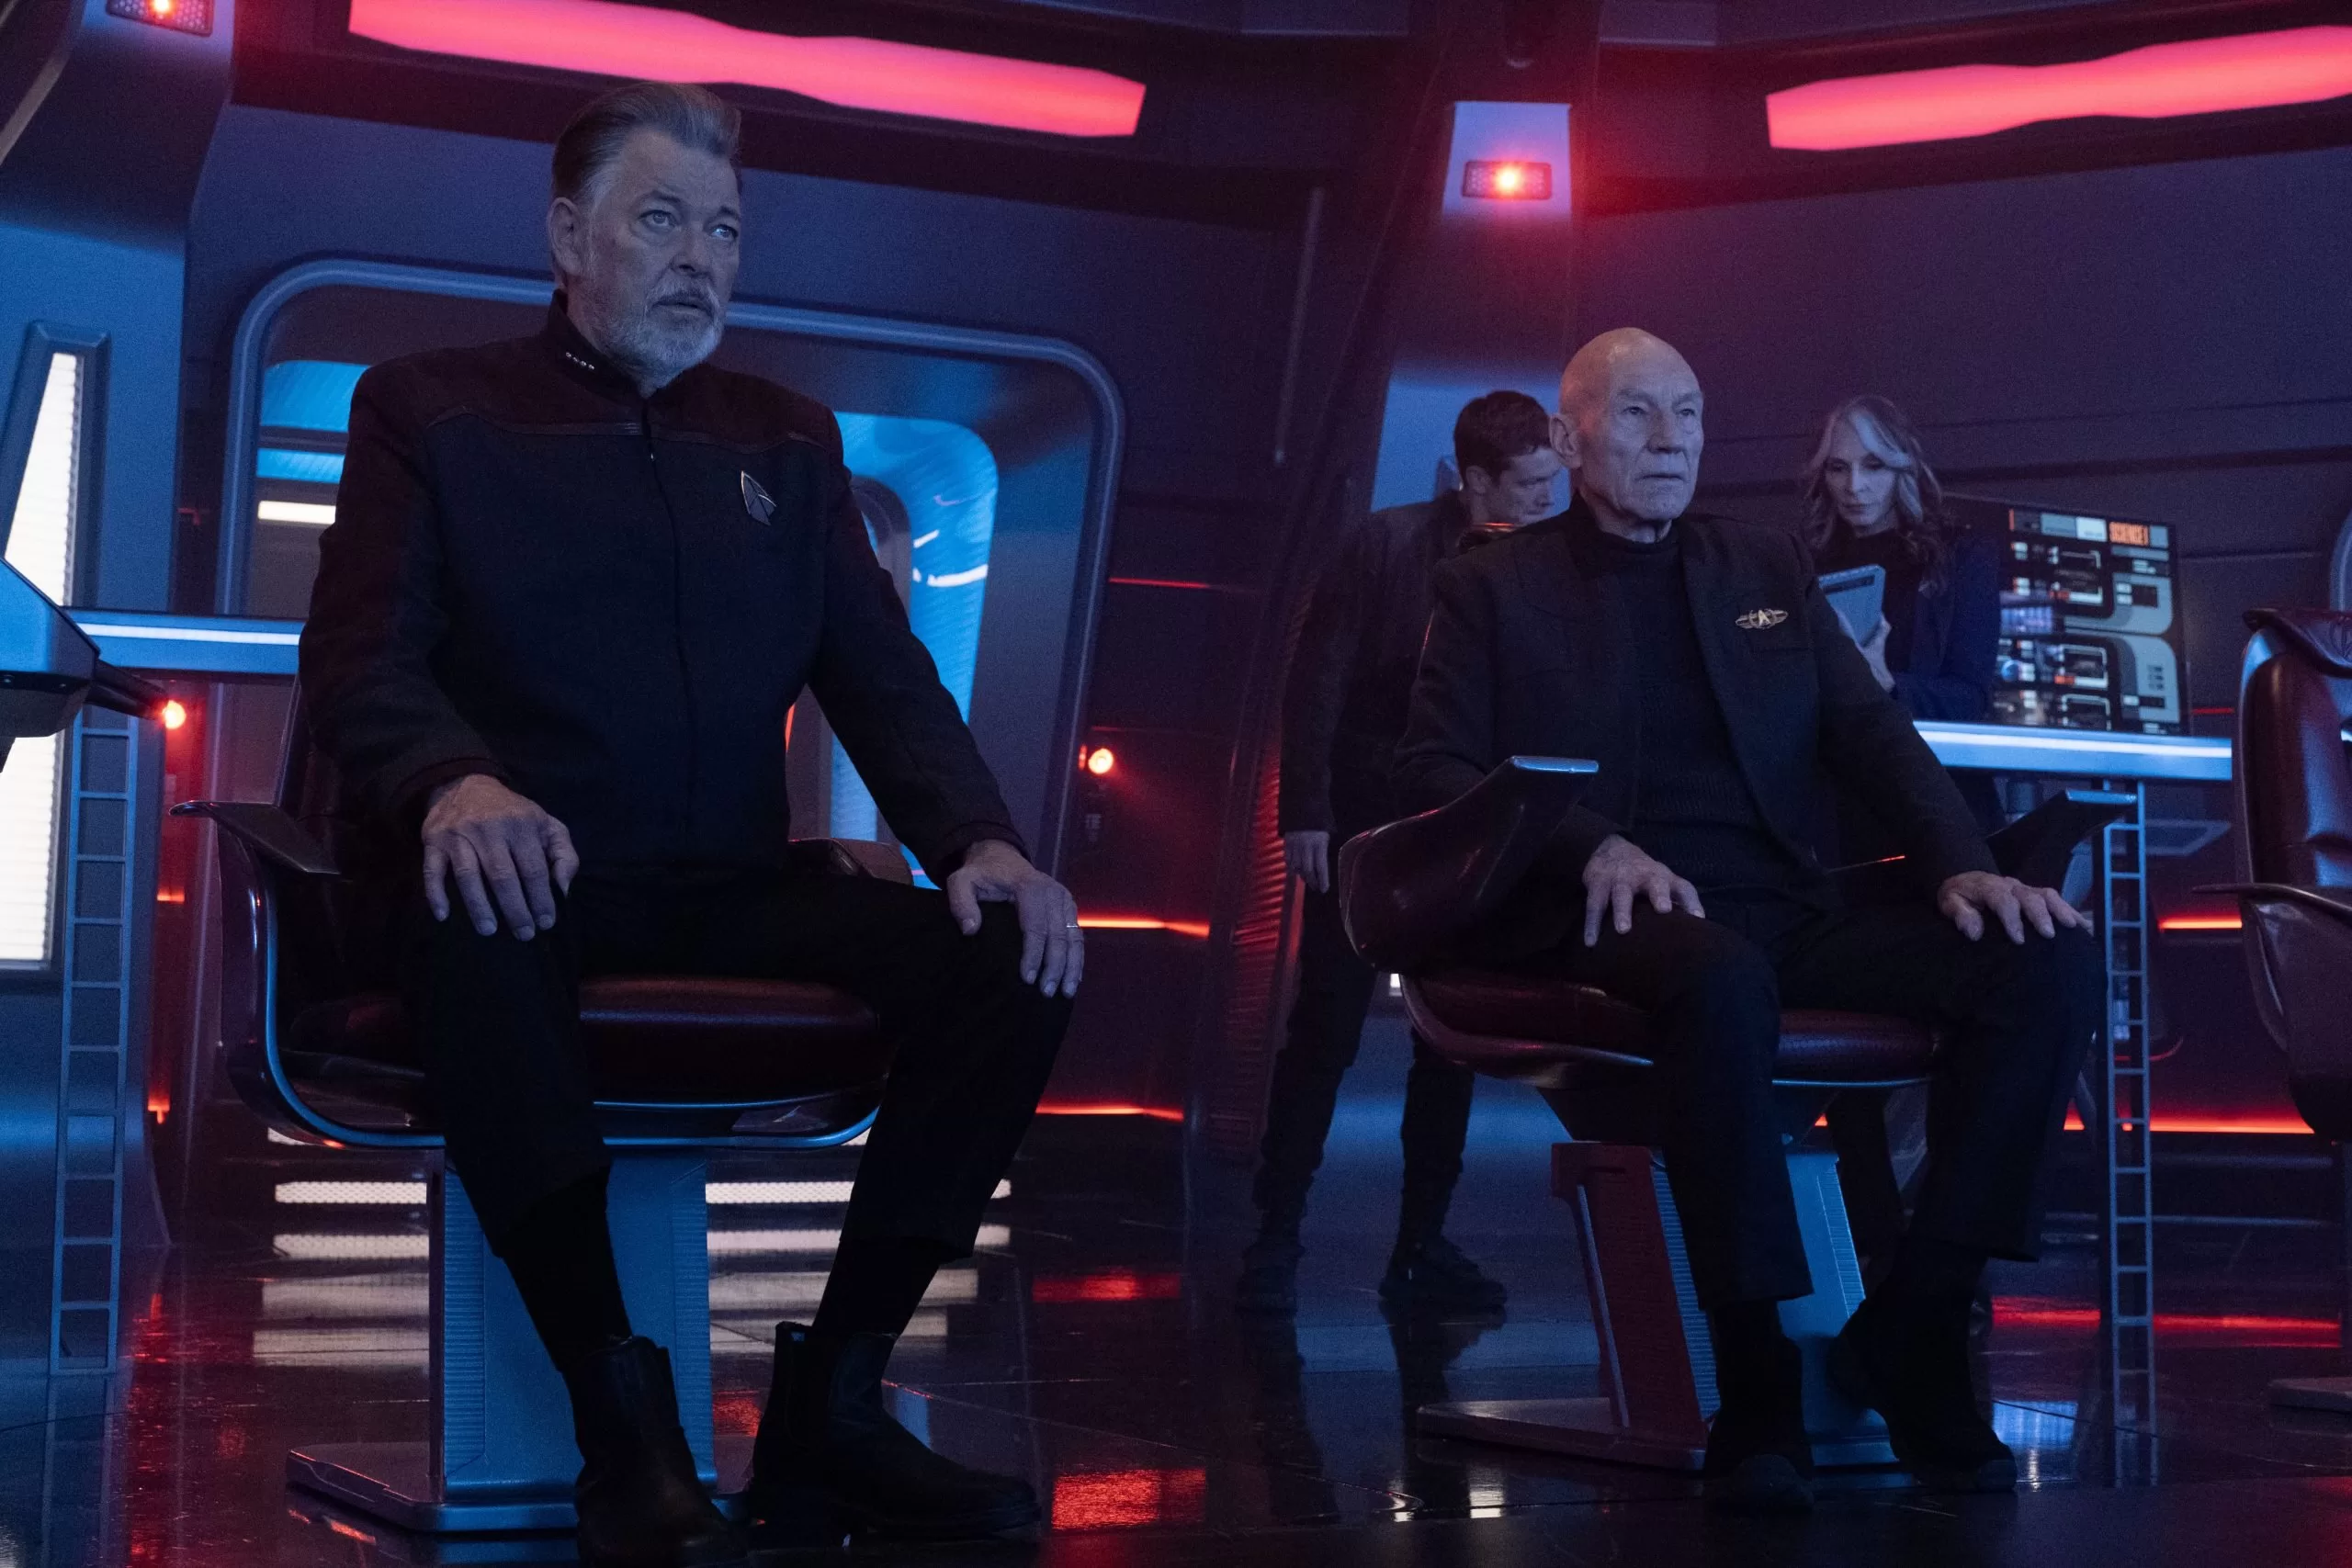 Picard and Riker on the bridge with Beverly and Jack Crusher in the background